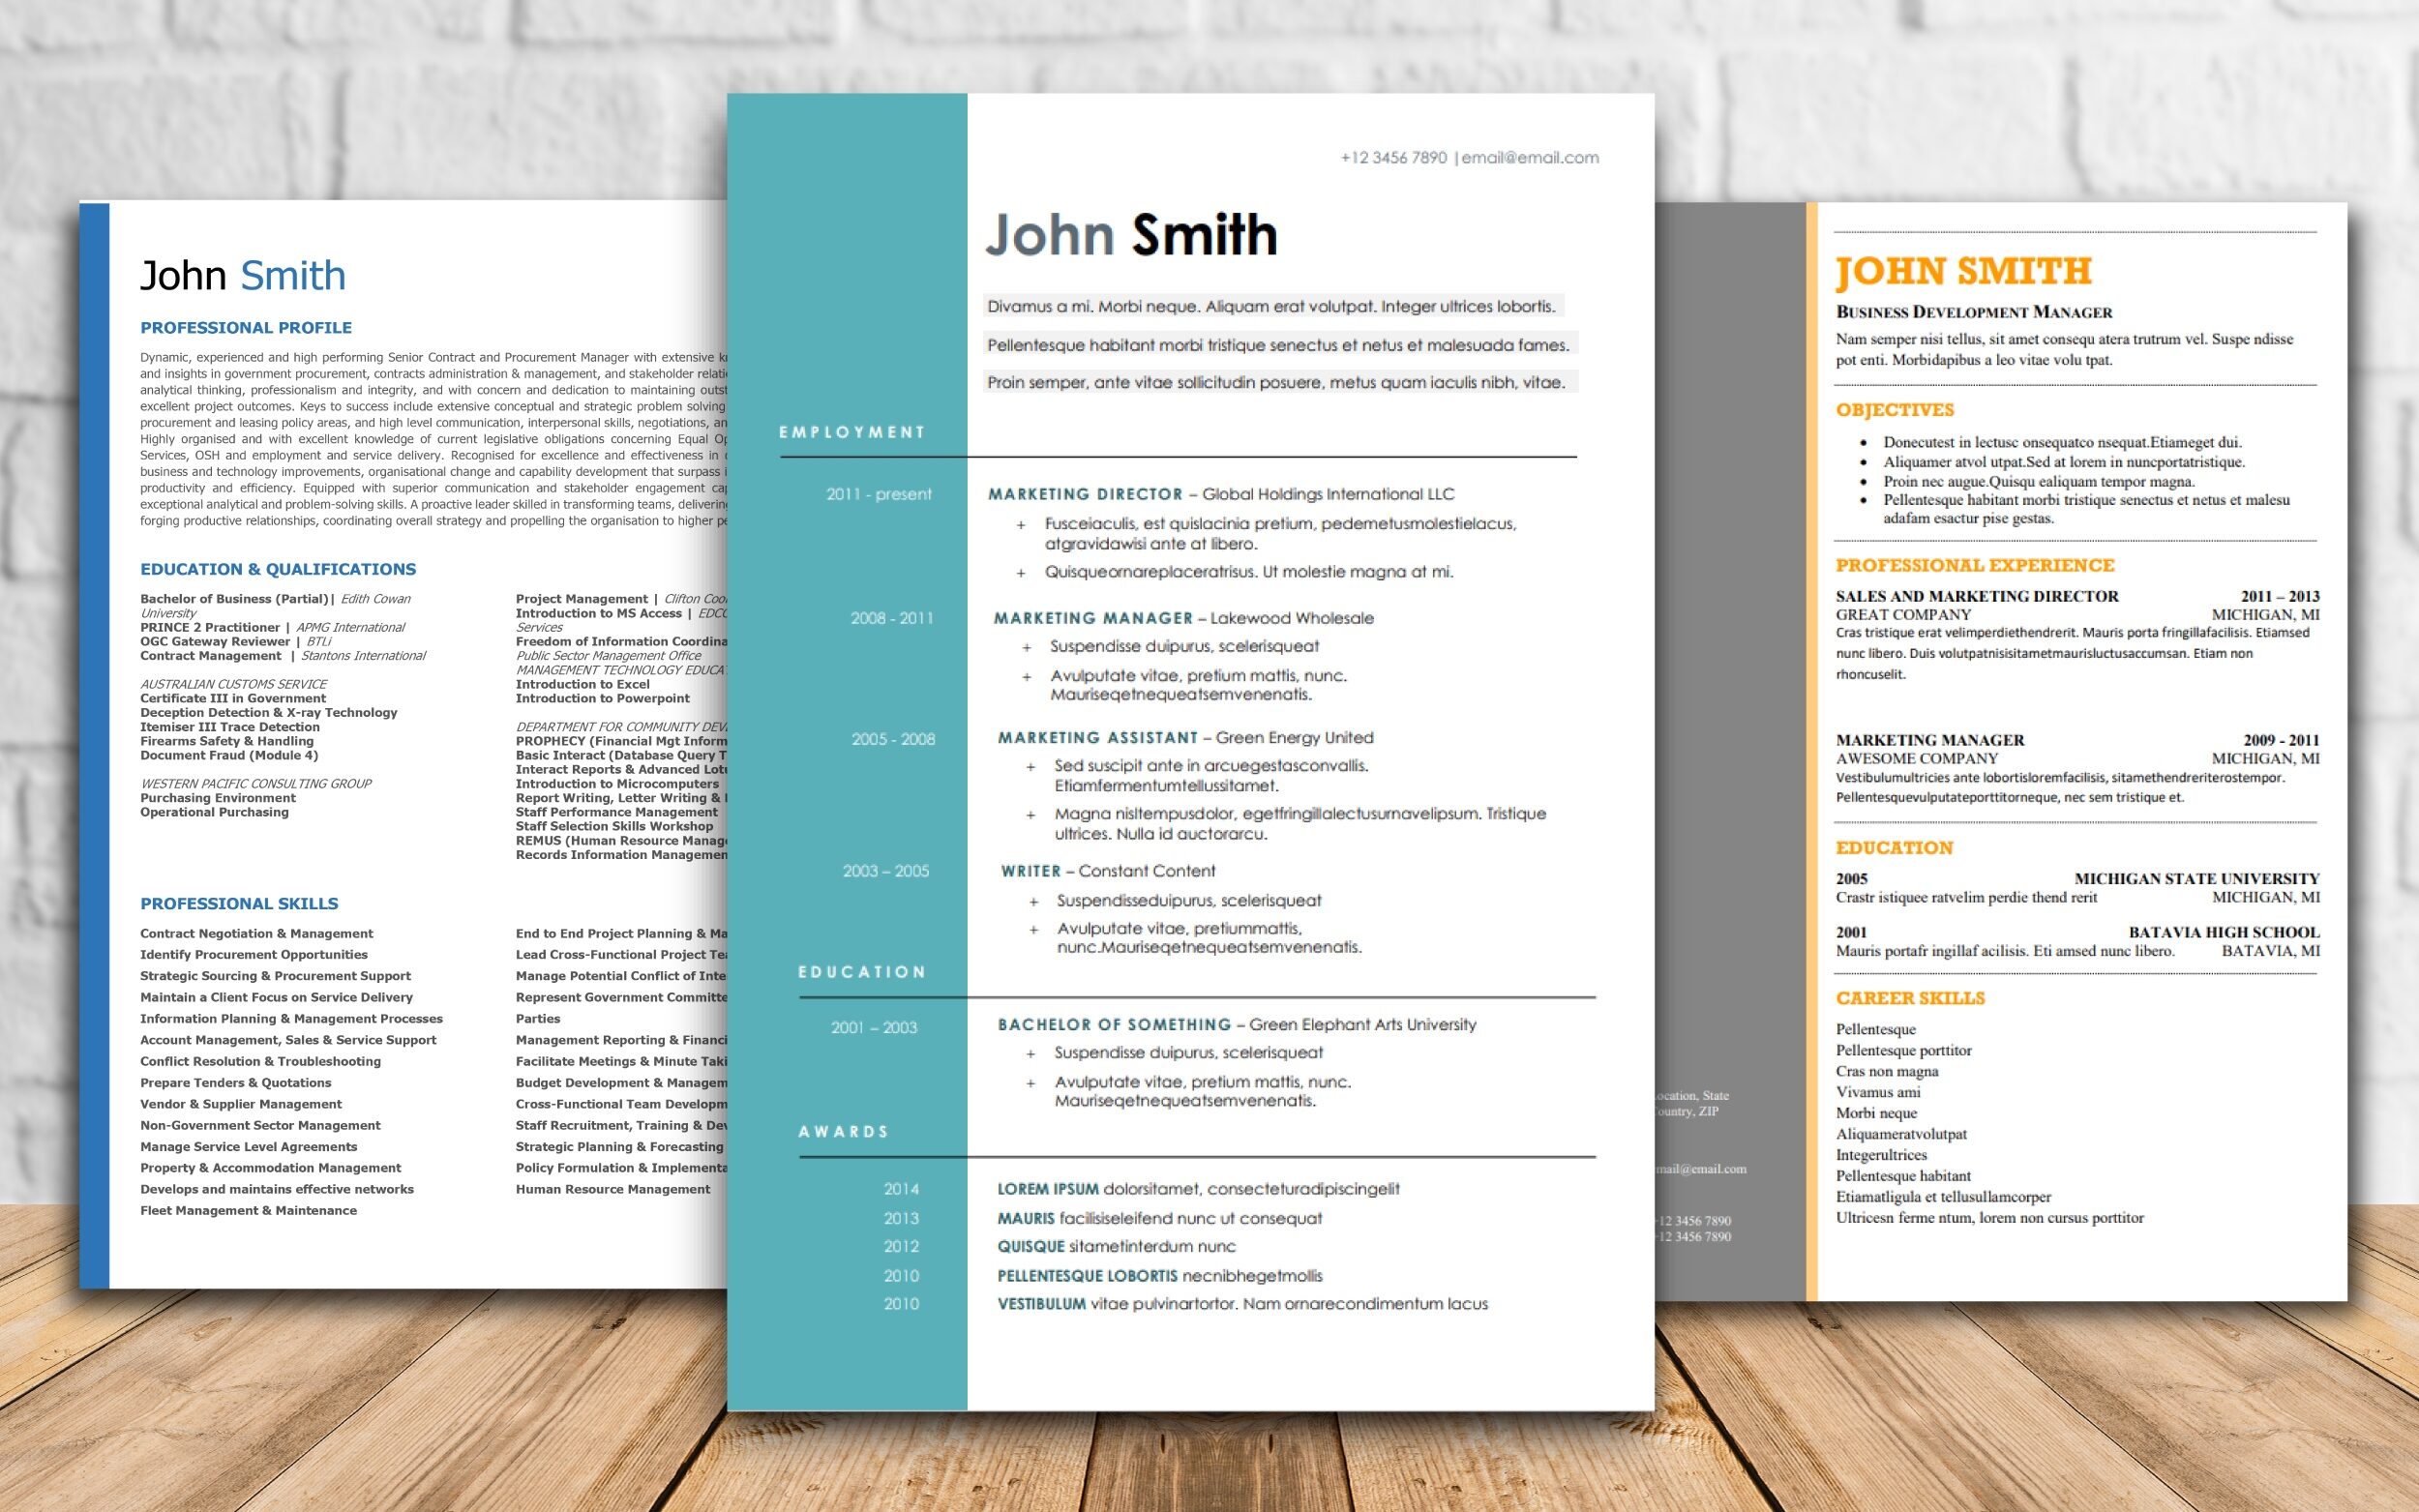 Professional Resume & Cover Letter Writing